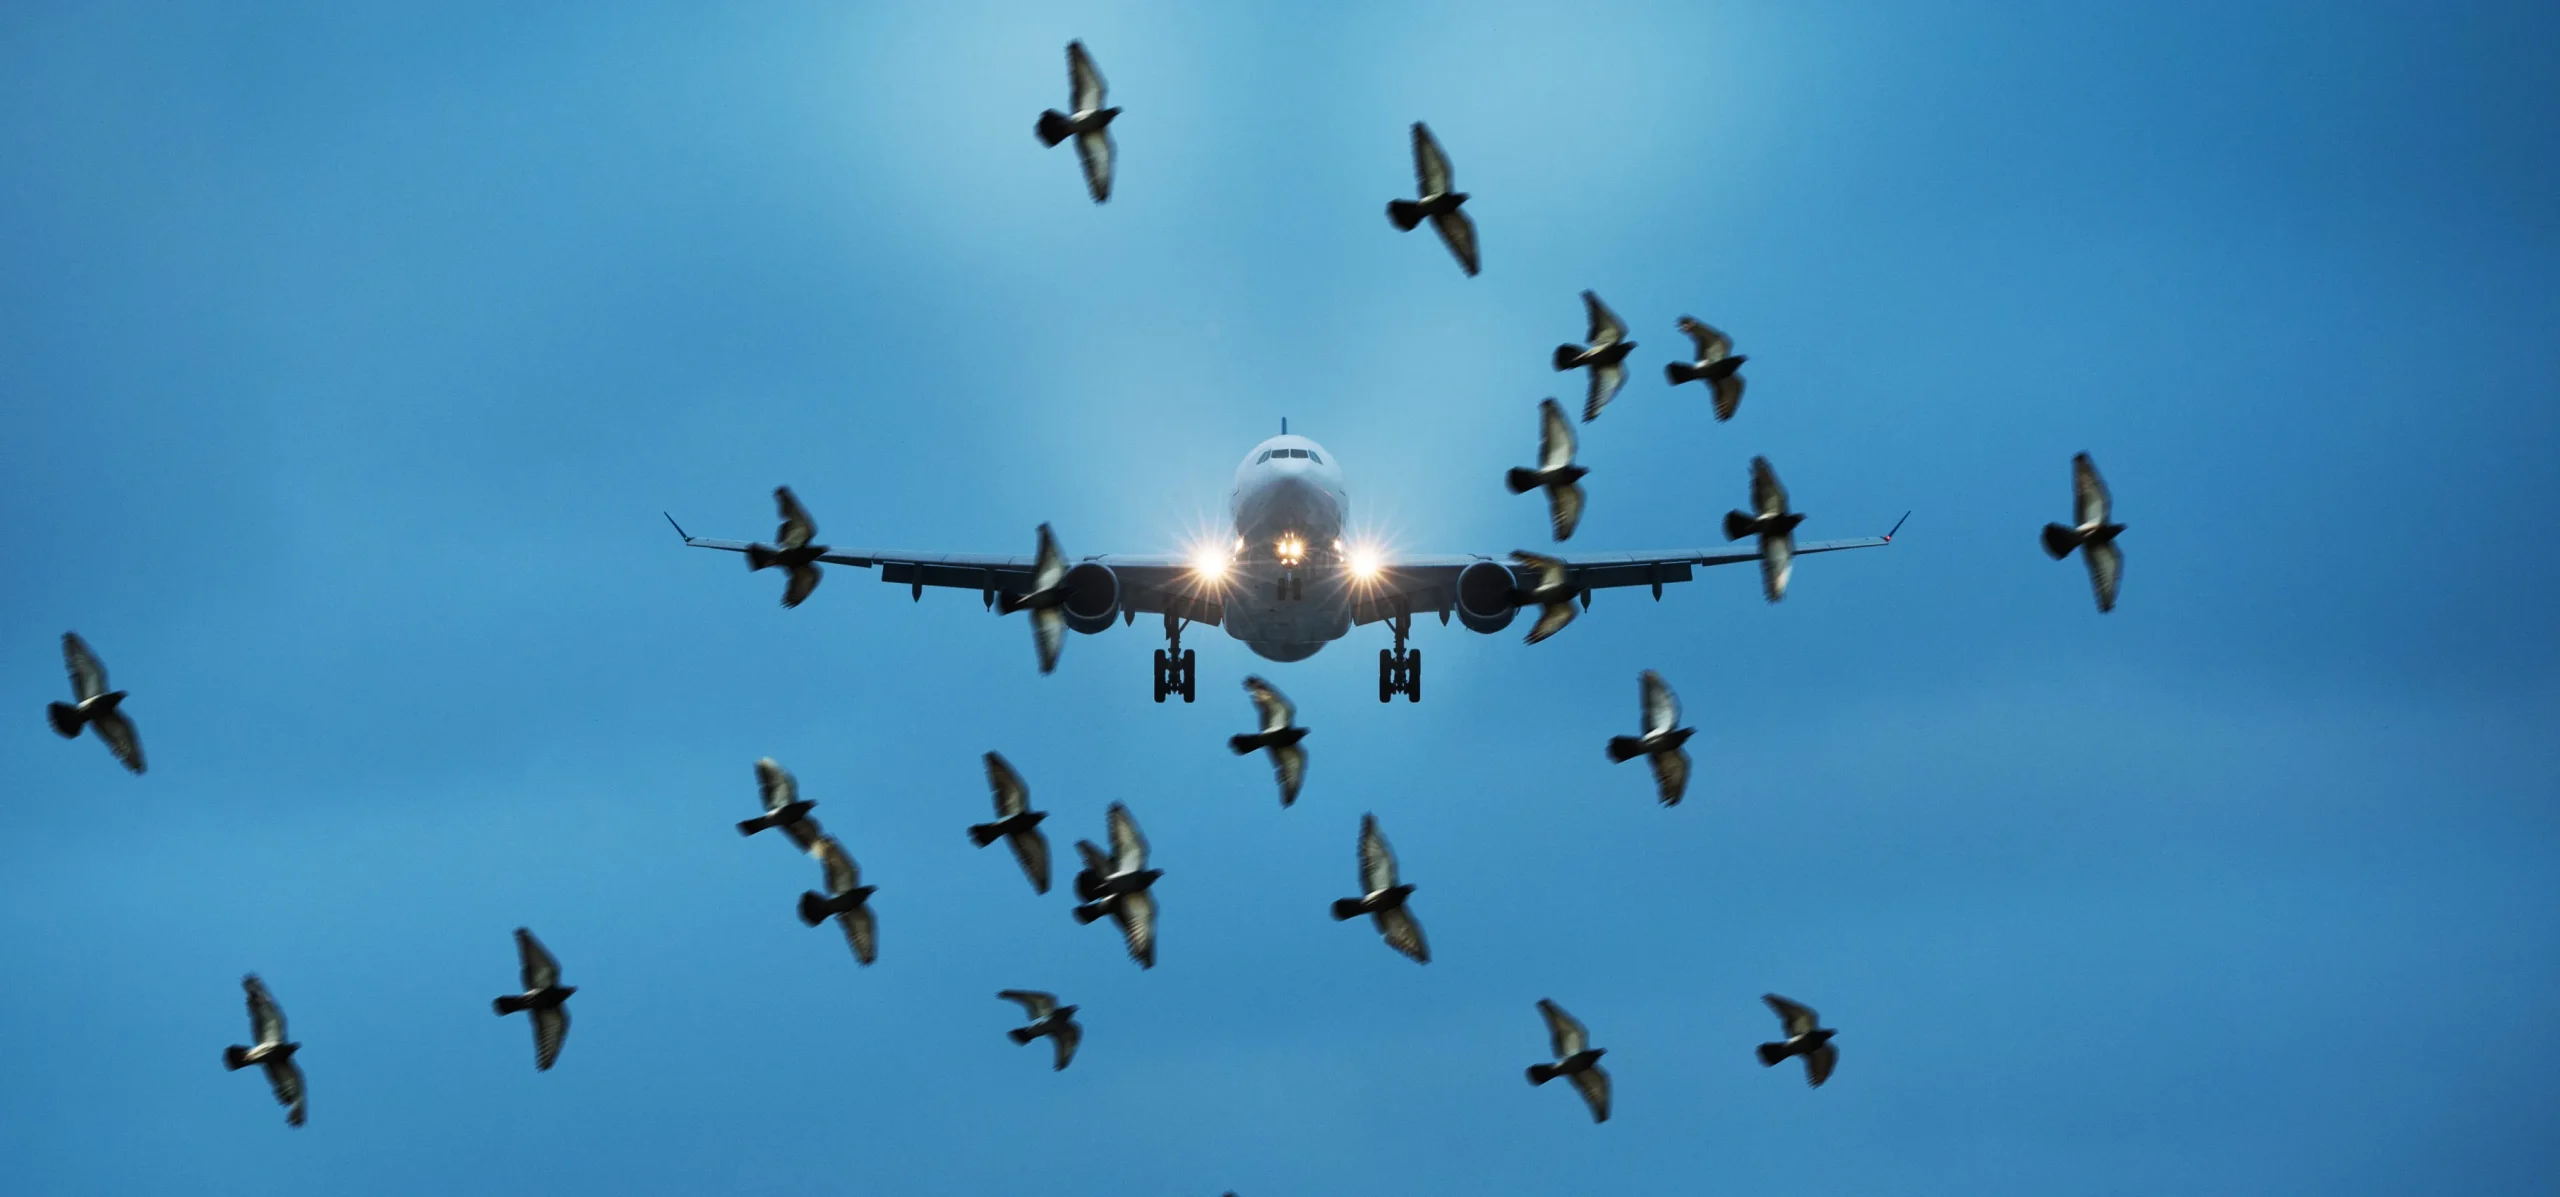 how to prevent bird strikes on aircraft